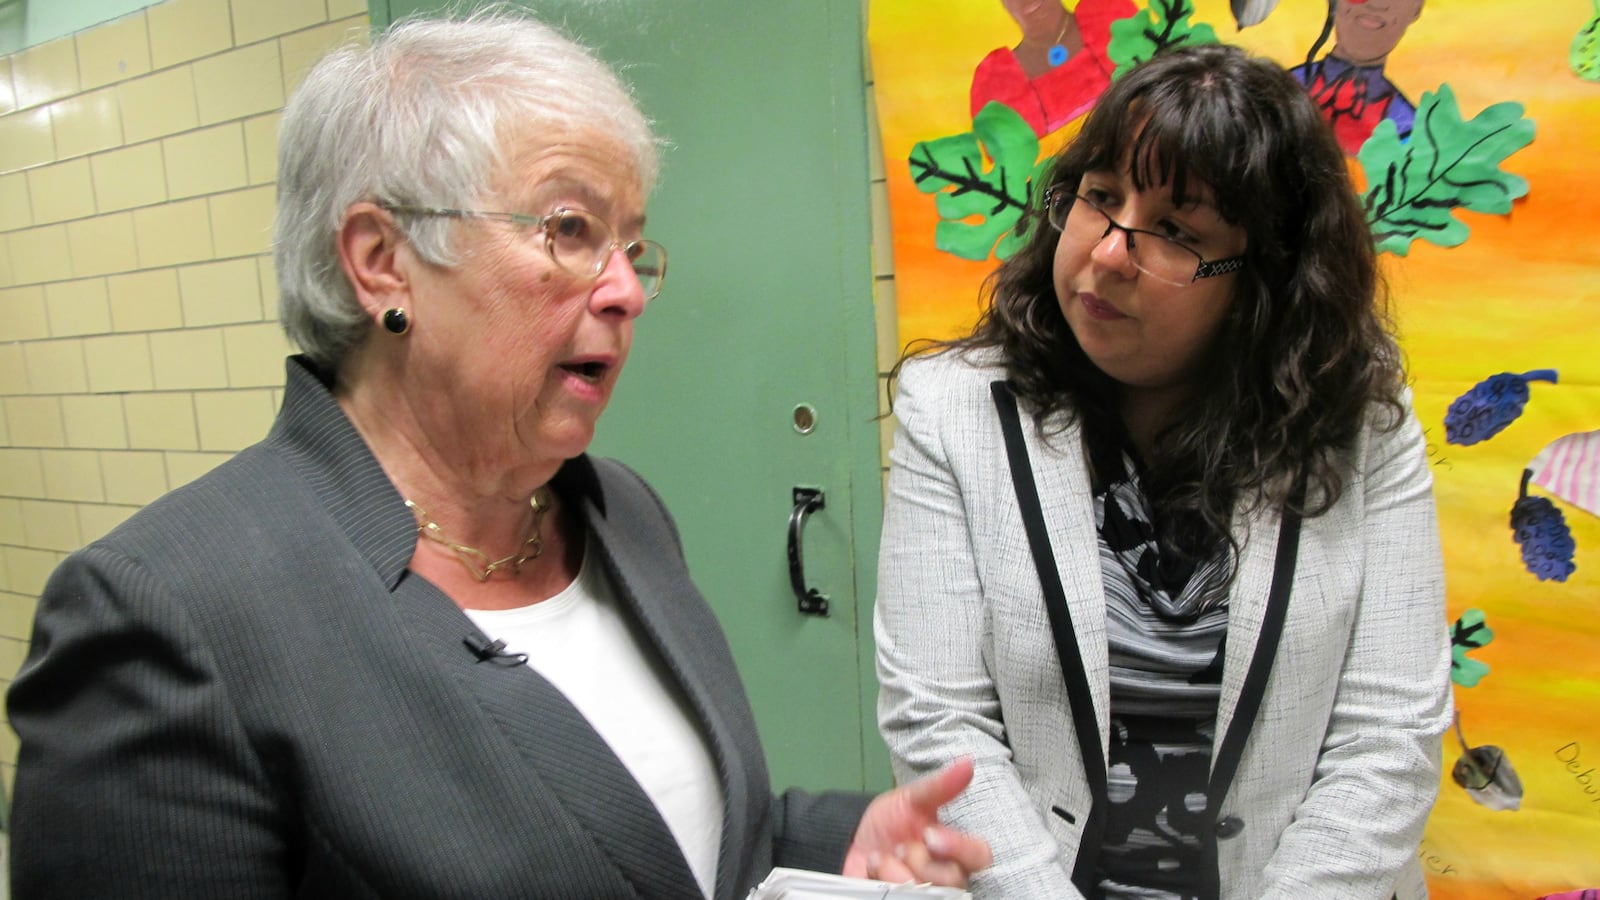 Chancellor Carmen Fariña toured P.S. 123 in Harlem earlier this year and referred to the Success Academy charter school in the building, but did not visit it.